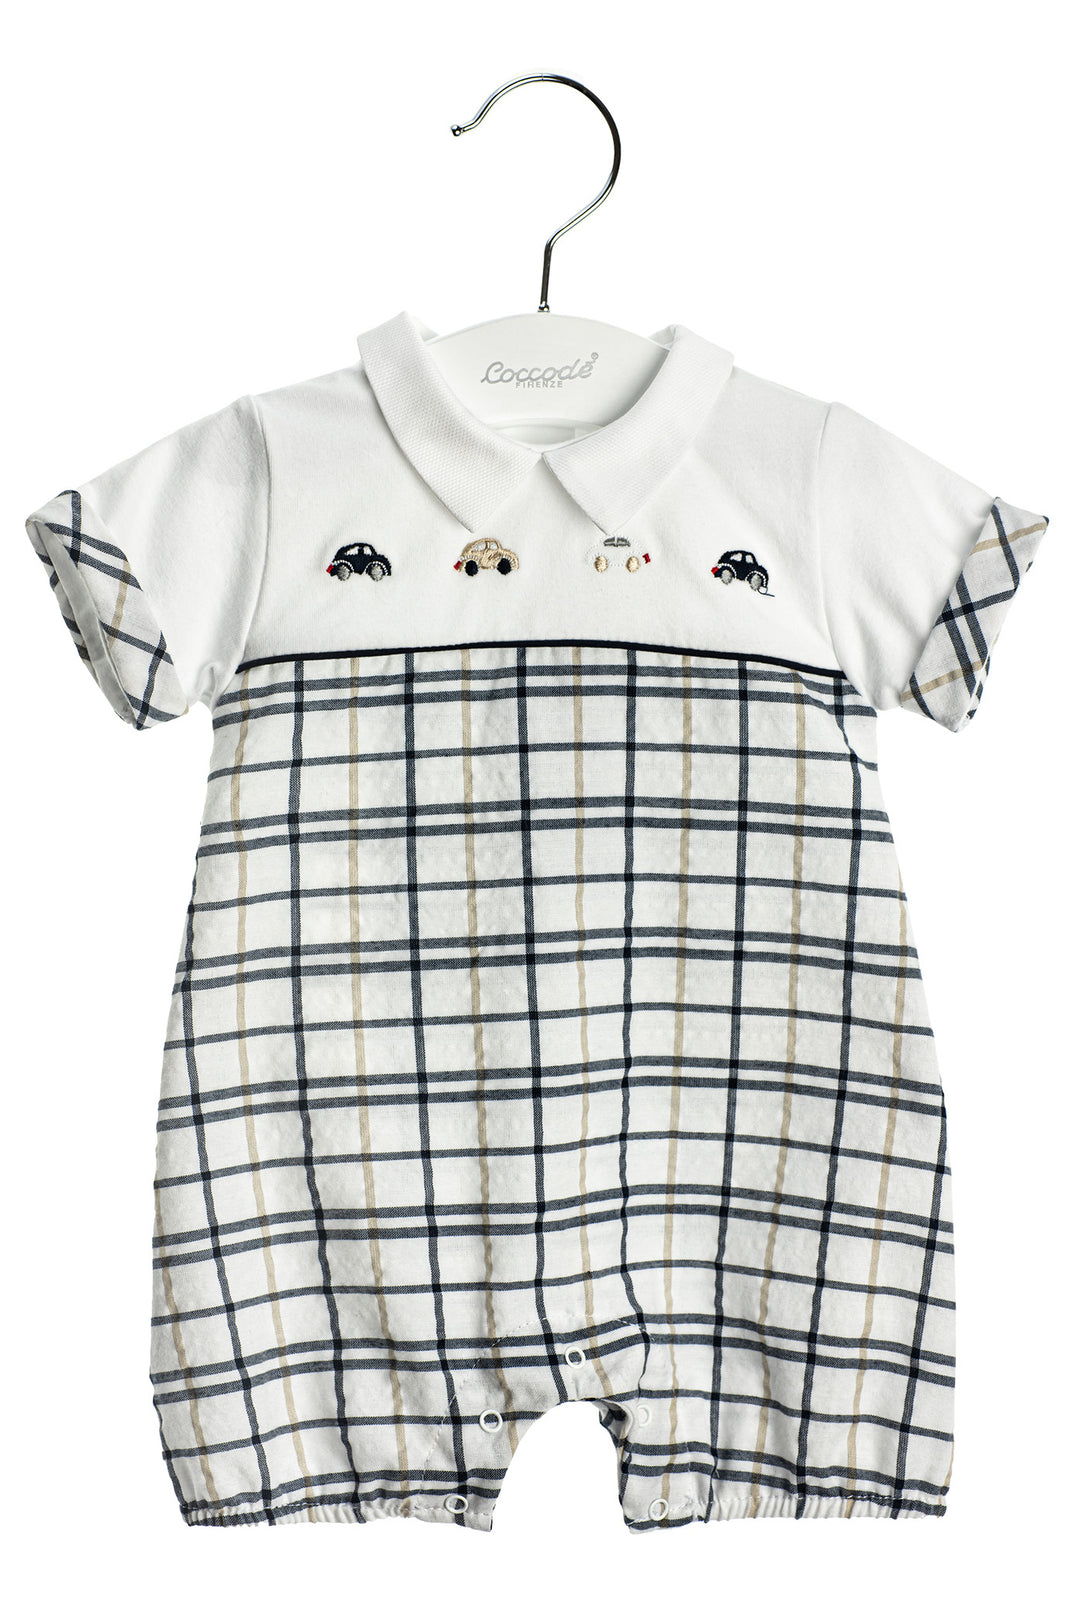 Coccodè "Maurice" Navy Checked Car Romper | Millie and John